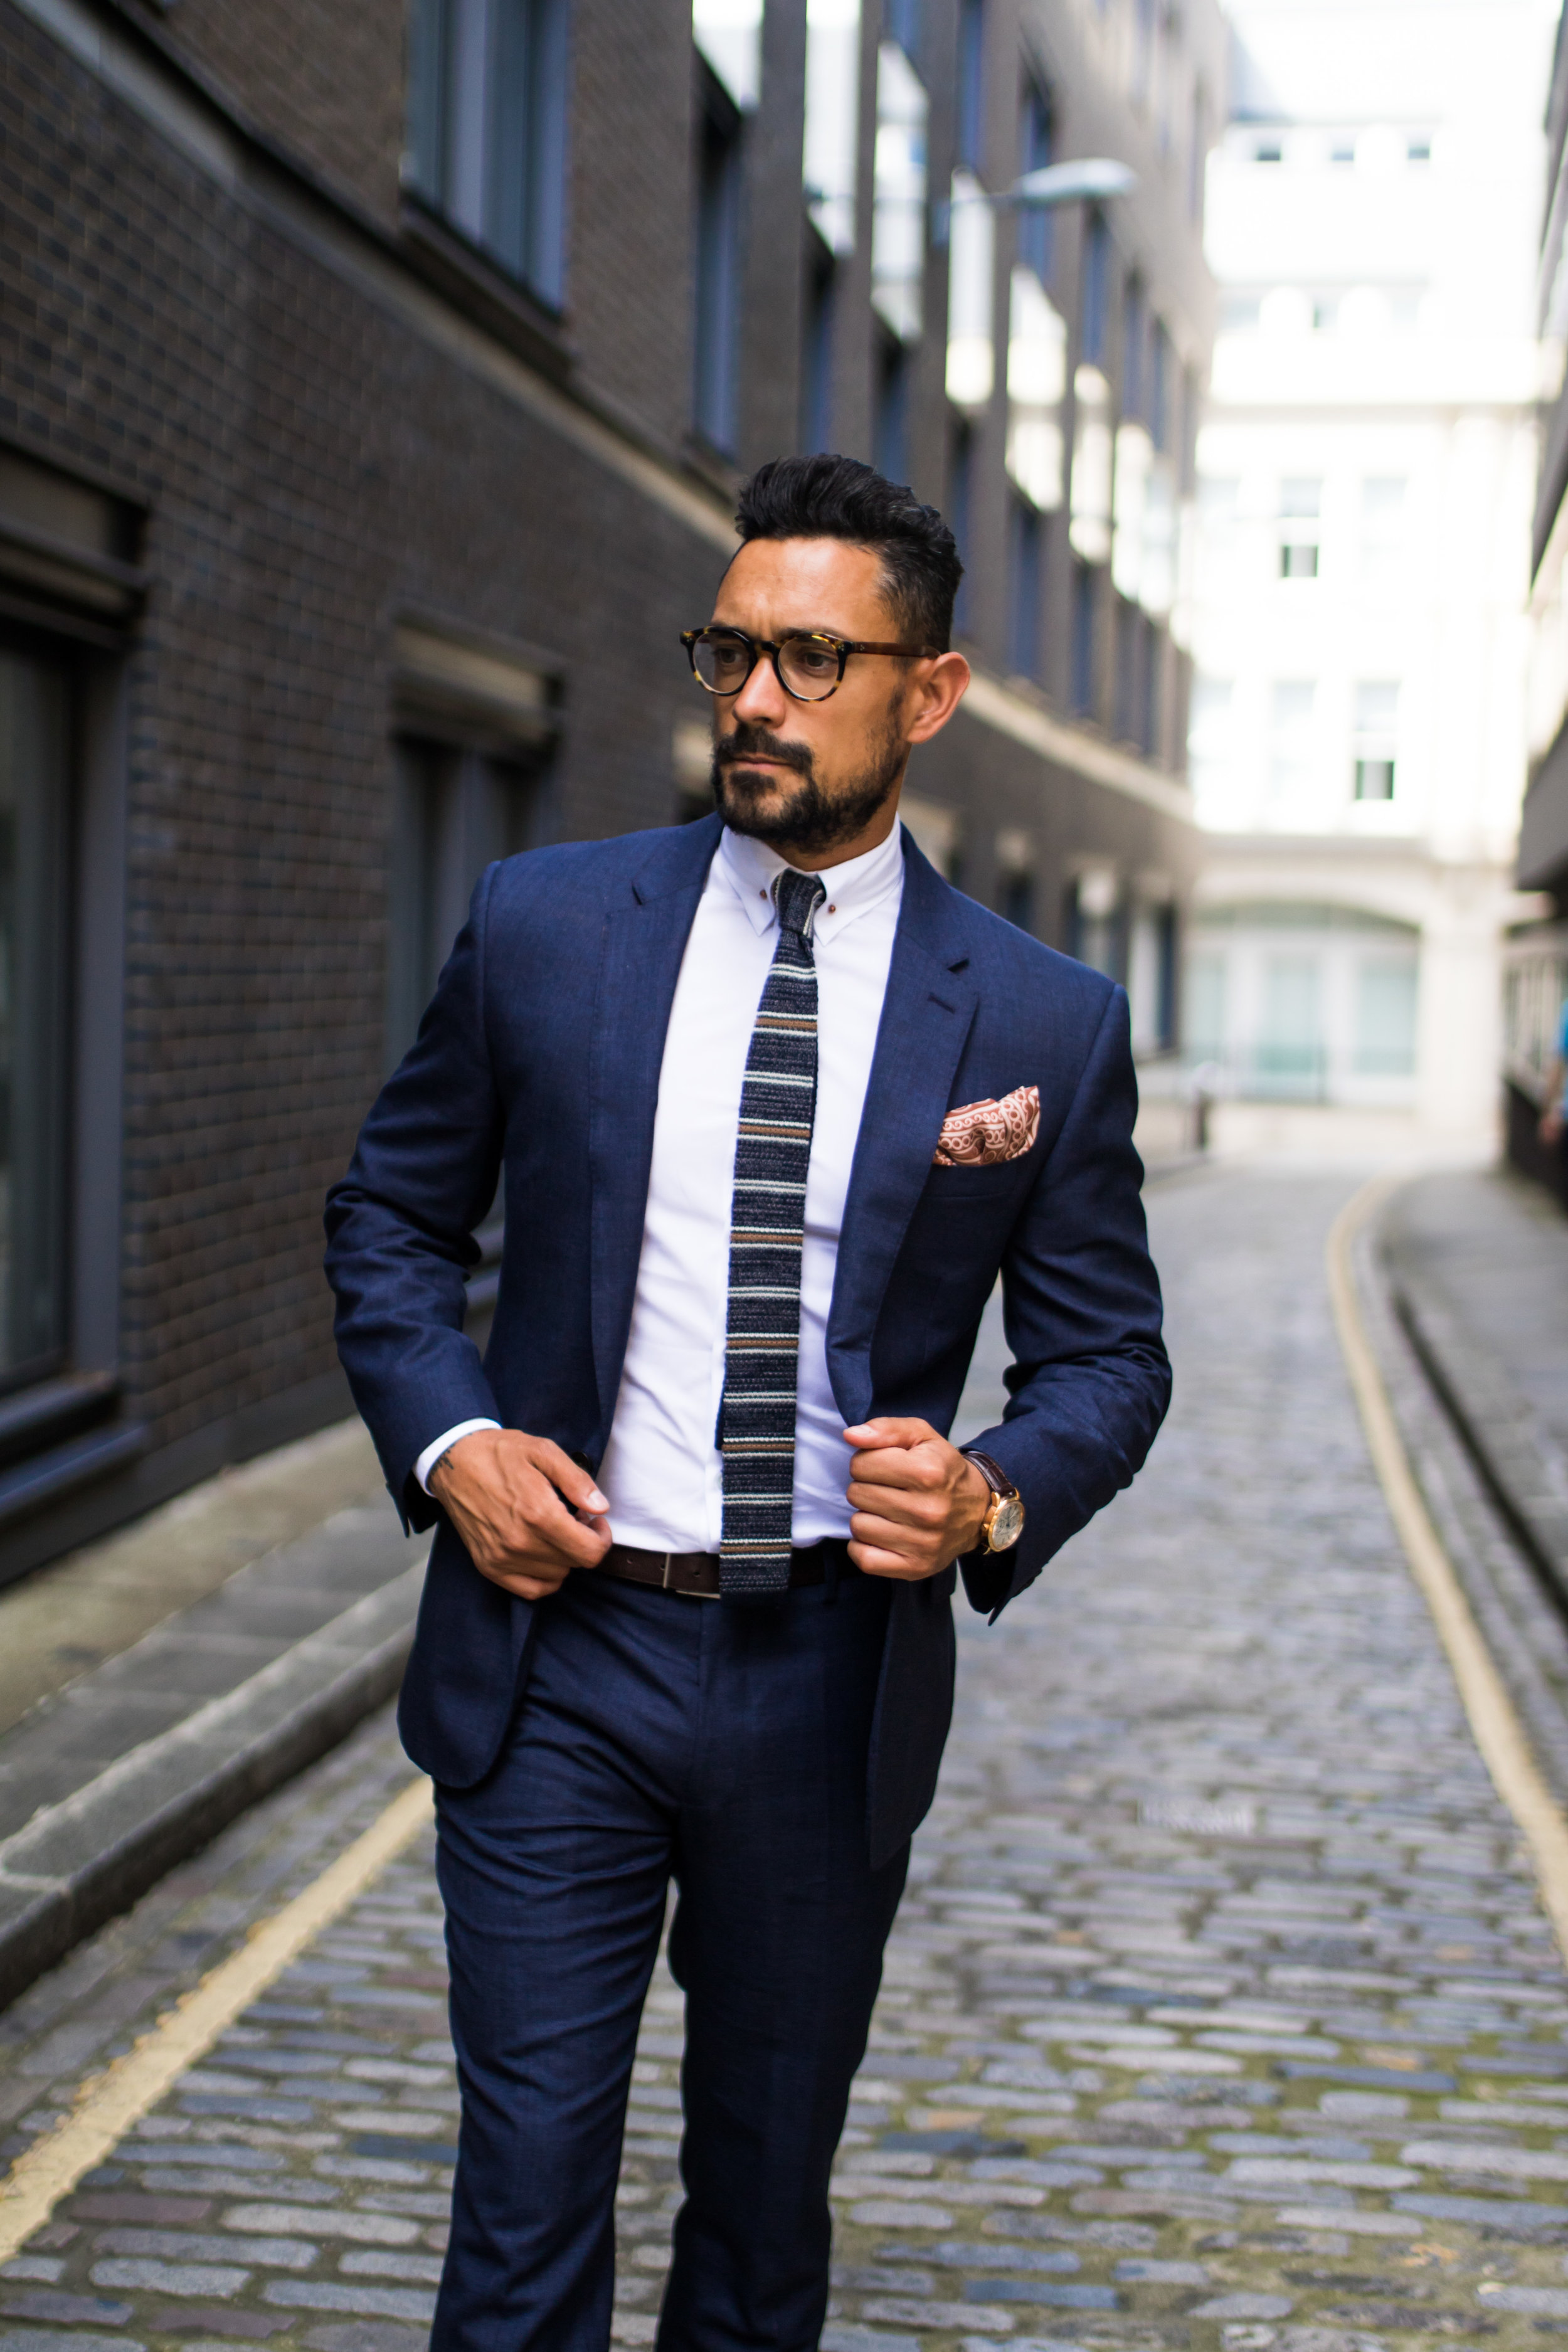 How to wear a navy suit 5 ways — MEN'S STYLE BLOG